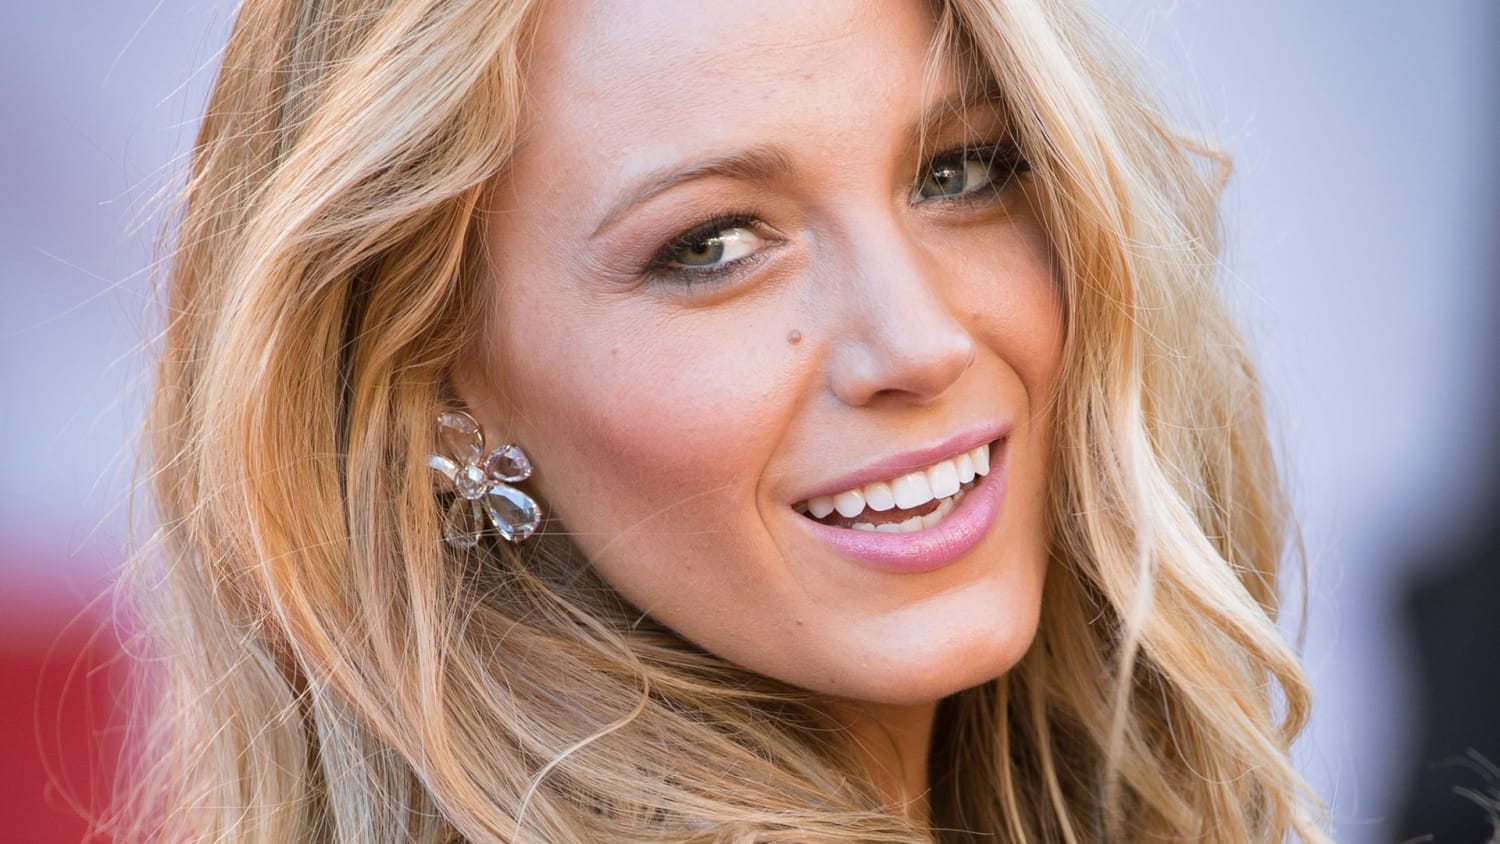 Blake Lively goes 'bronde': See the trendy hair color - TODAY.com1920 x 1080